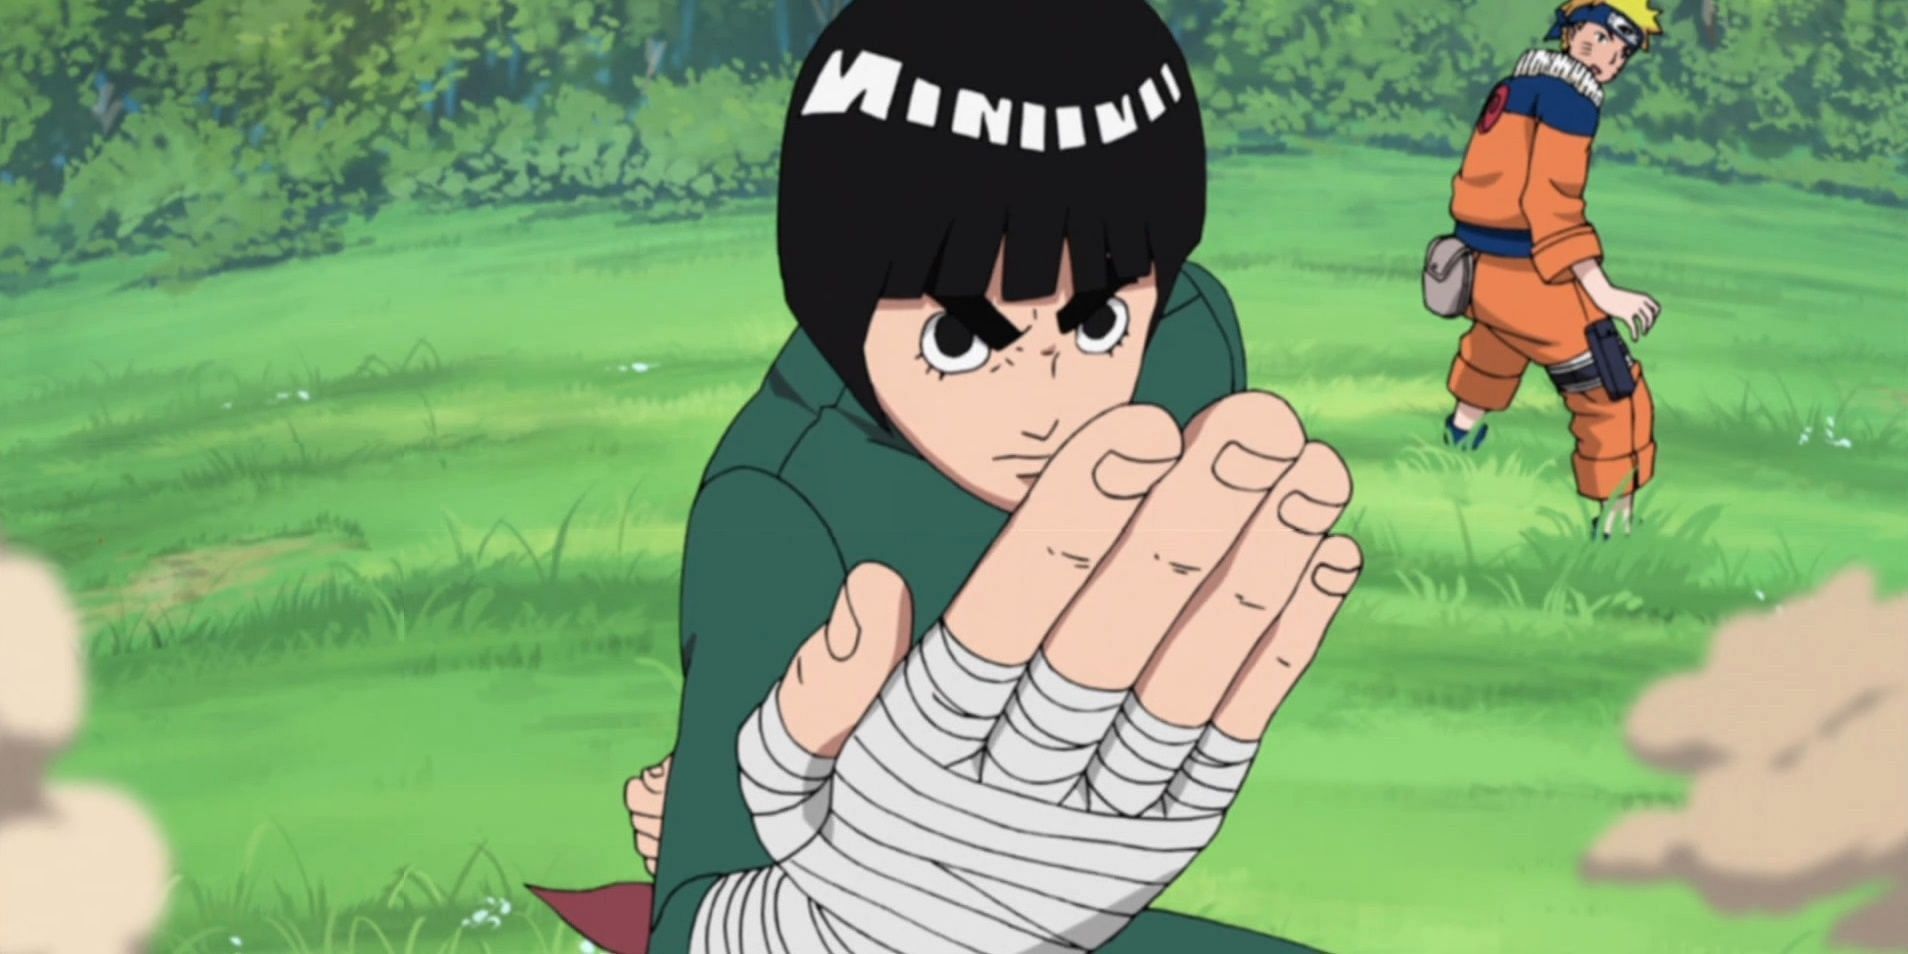 Rock Lee from the Naruto series (Image via Pierrot)